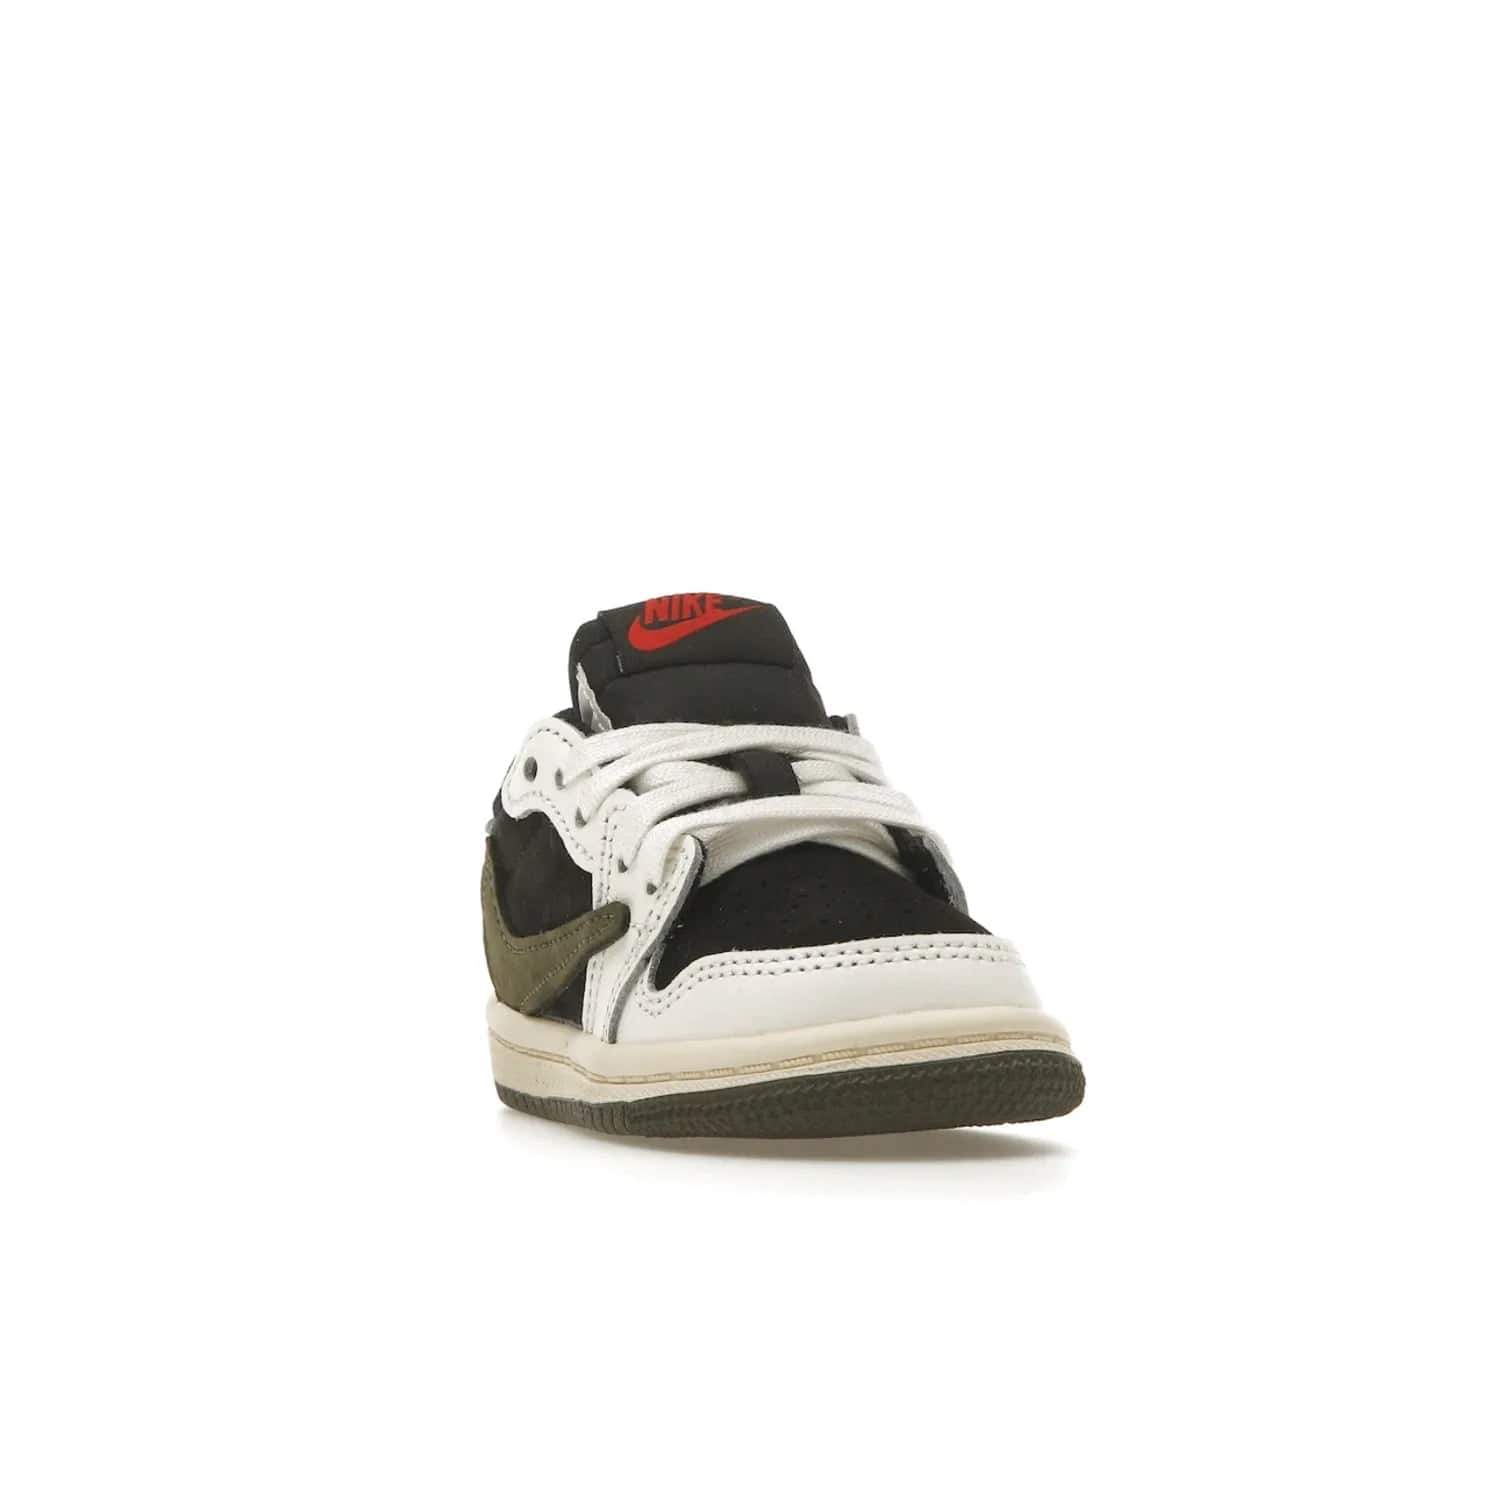 Jordan 1 Retro Low OG SP Travis Scott Olive (TD) - Image 8 - Only at www.BallersClubKickz.com - Get the iconic style & comfort you love with the Jordan 1 Retro Low OG SP Travis Scott Olive. Featuring a premium upper, Sail, Red, Black & Olive colorway & a durable rubber outsole for traction & cushioning. Get it now!